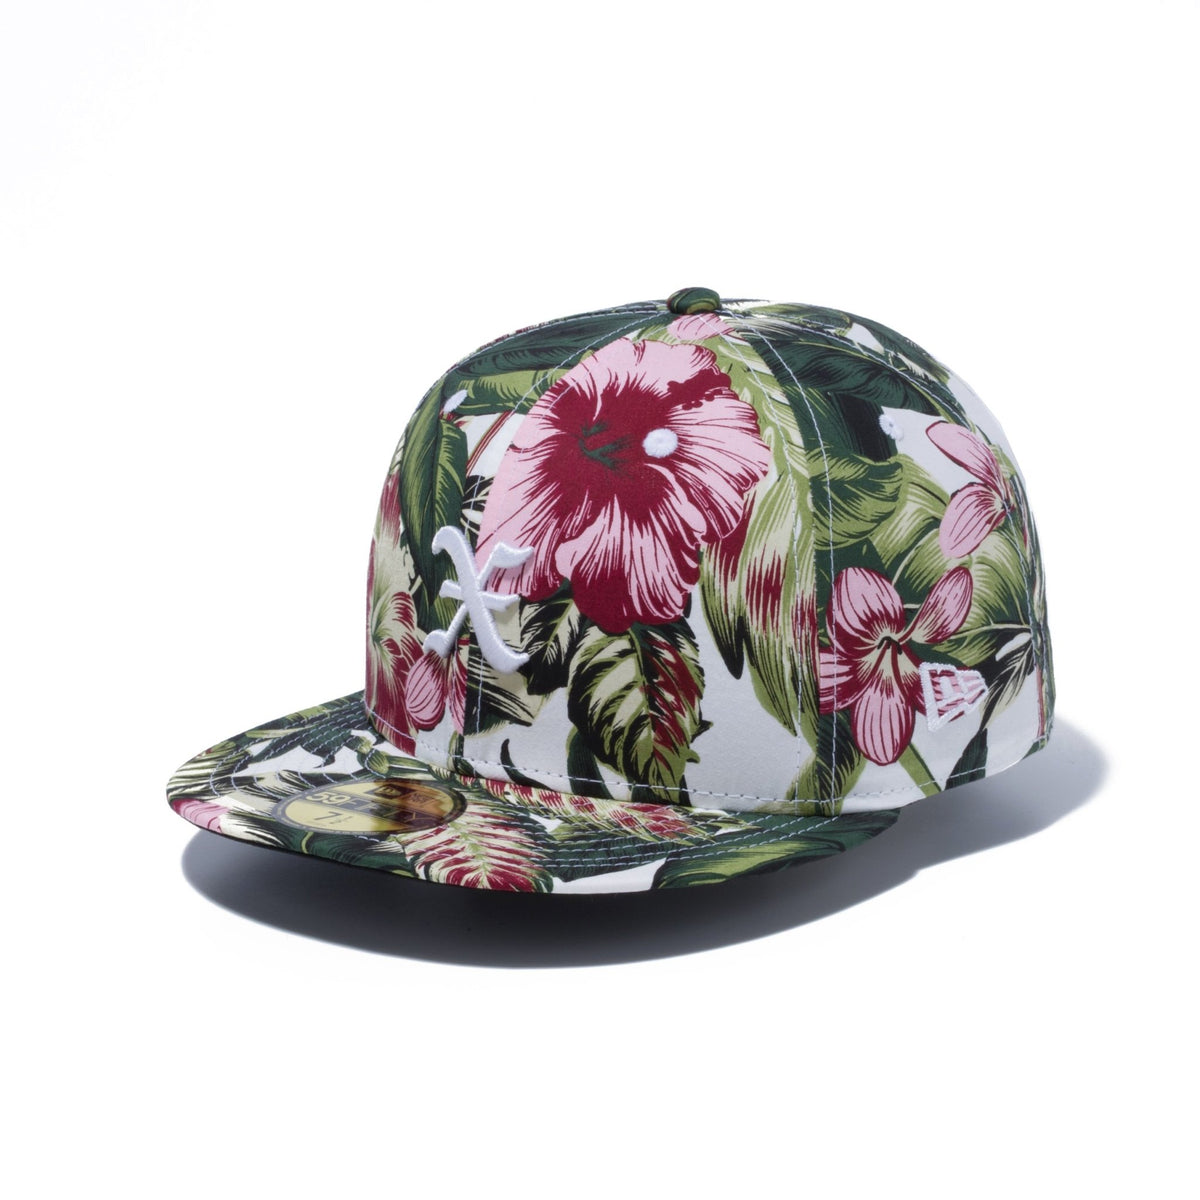 GOD SELECTION XXX. NEWERA ペイズリーハット-